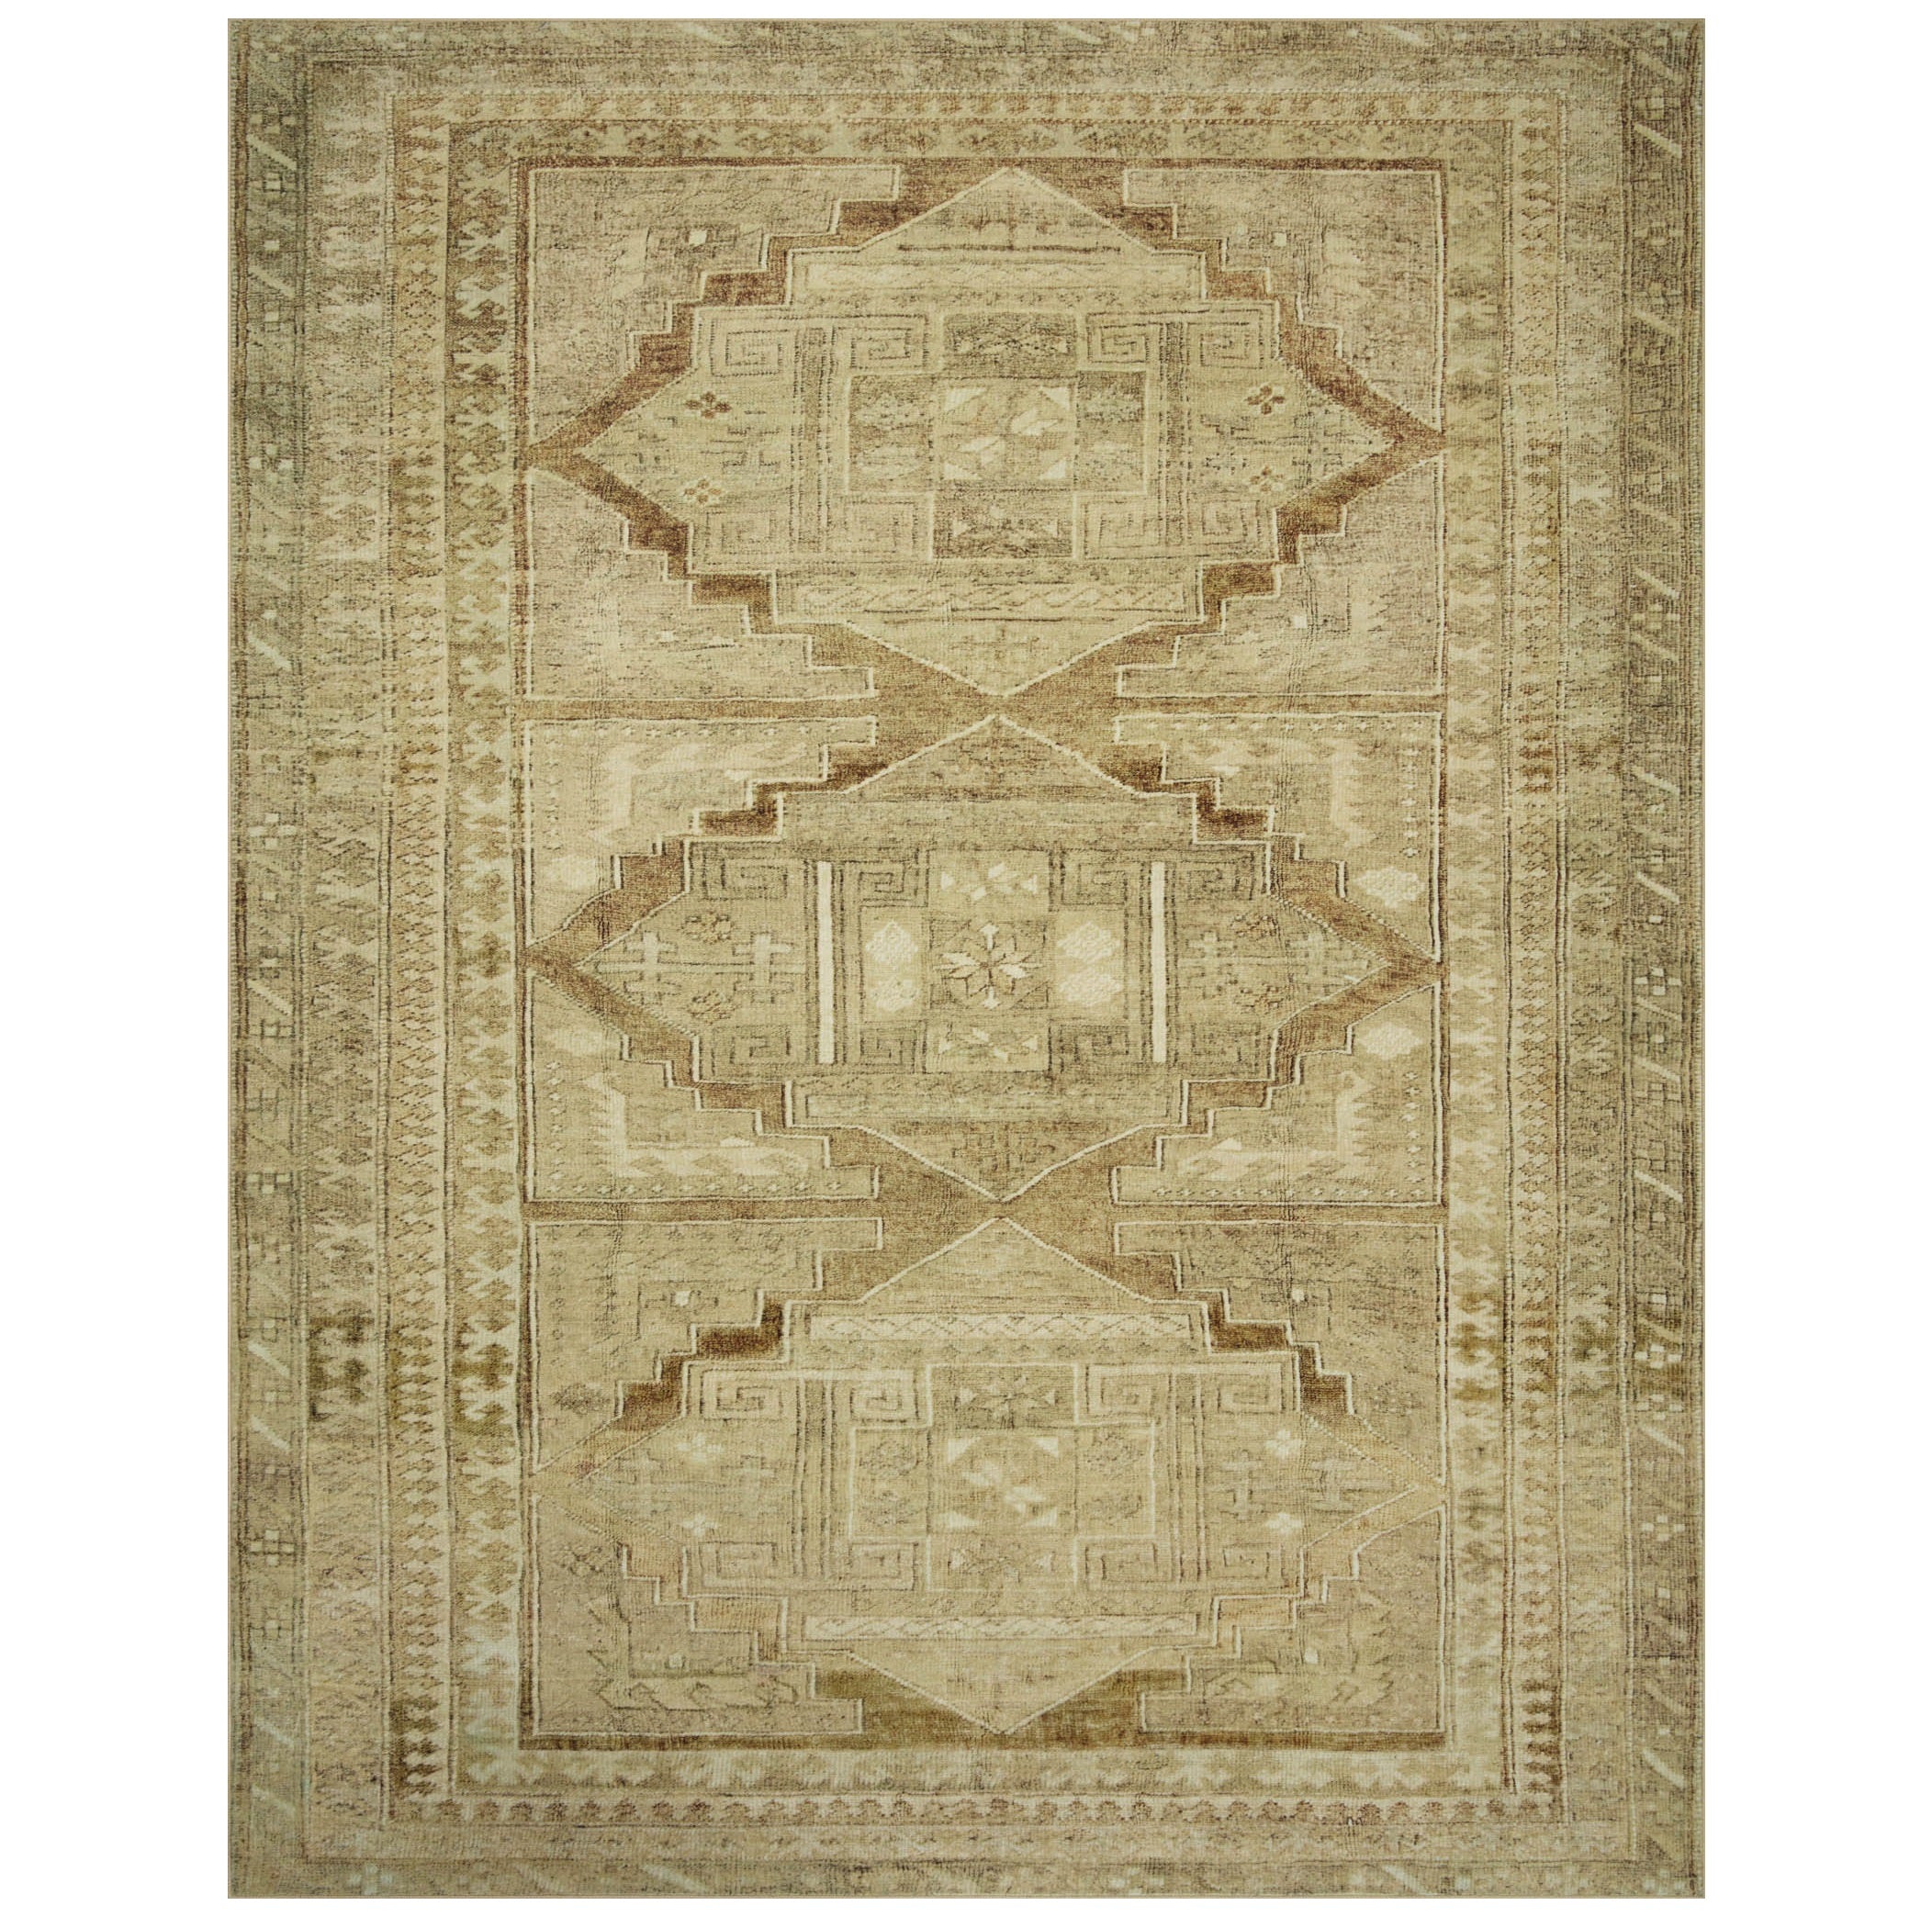 Sinclair Khaki Tobacco Rug Items range from $69.00 to $709.00